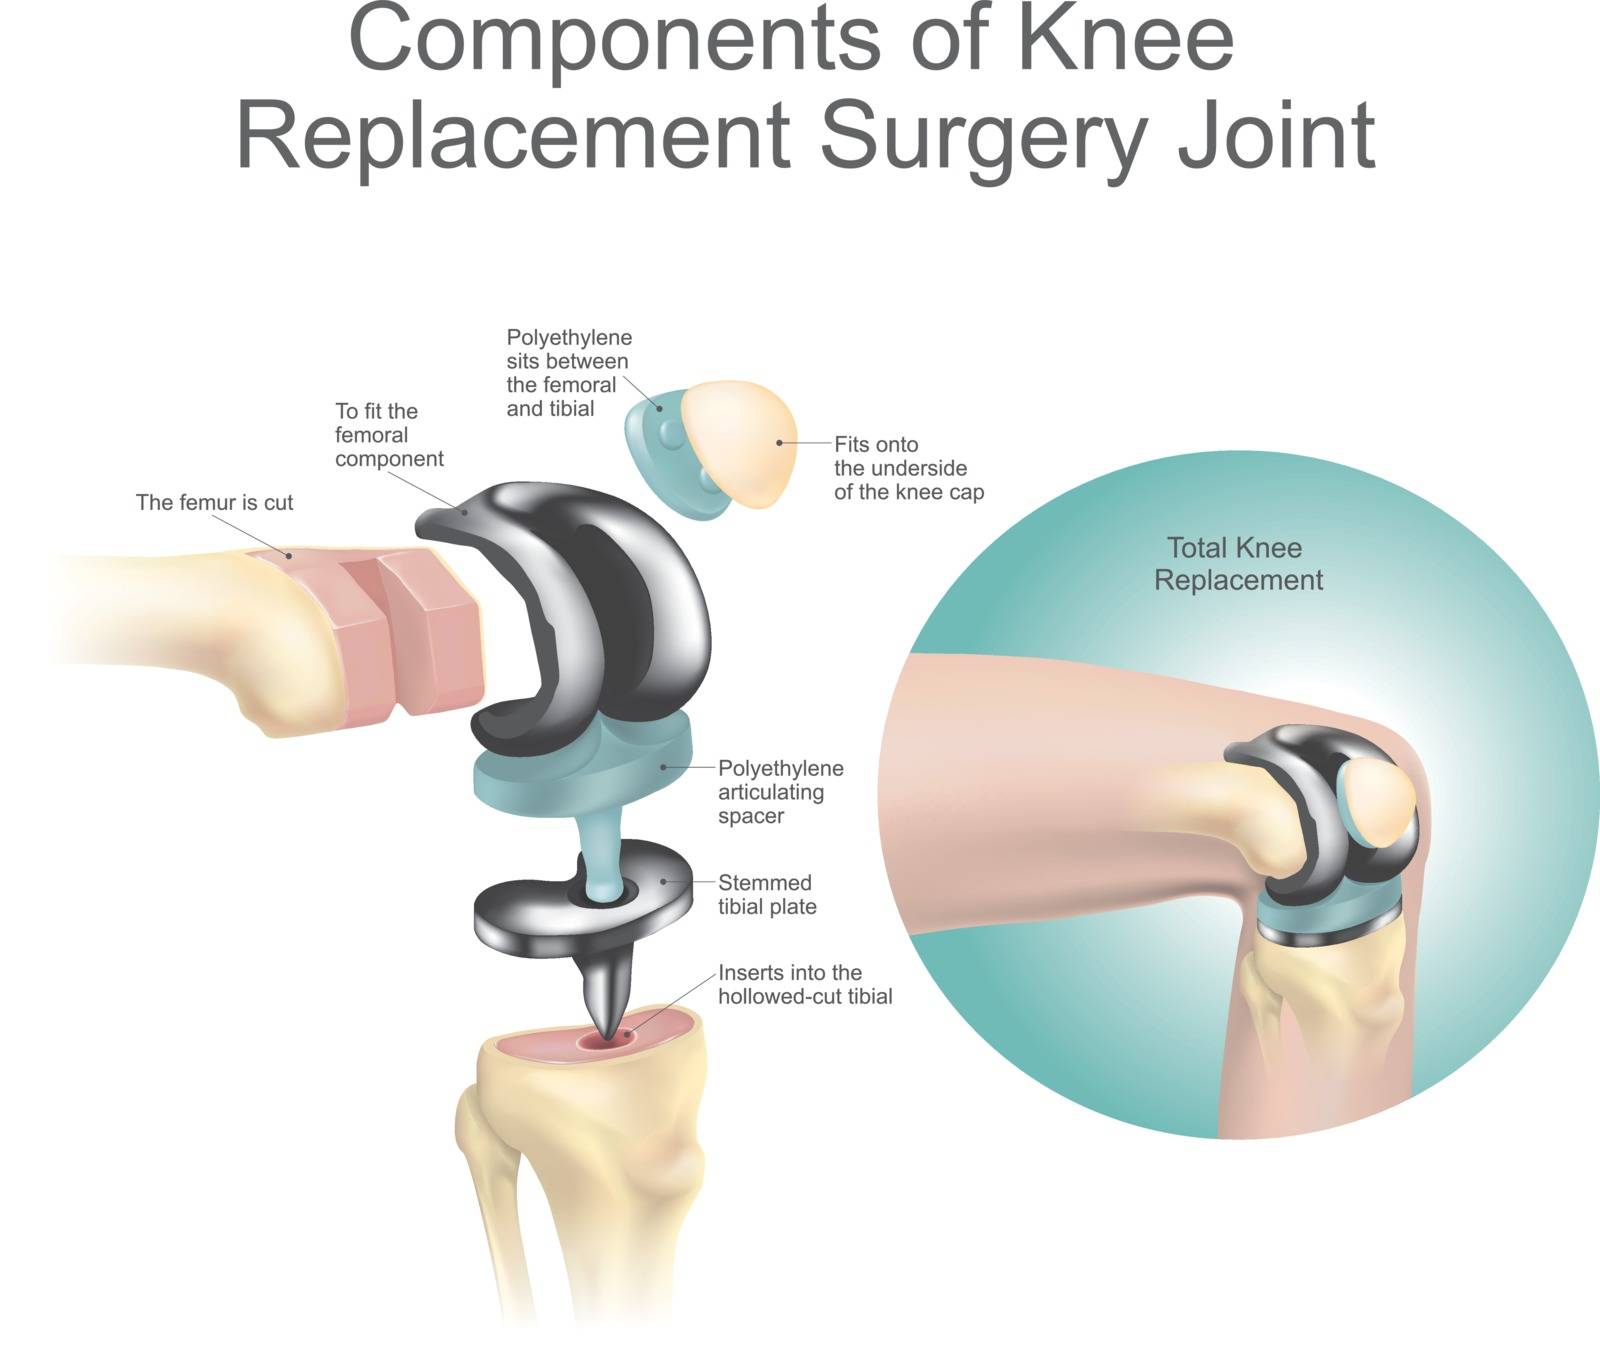 Components of knee replacement surgery joint. Health care. Anatomy body human.